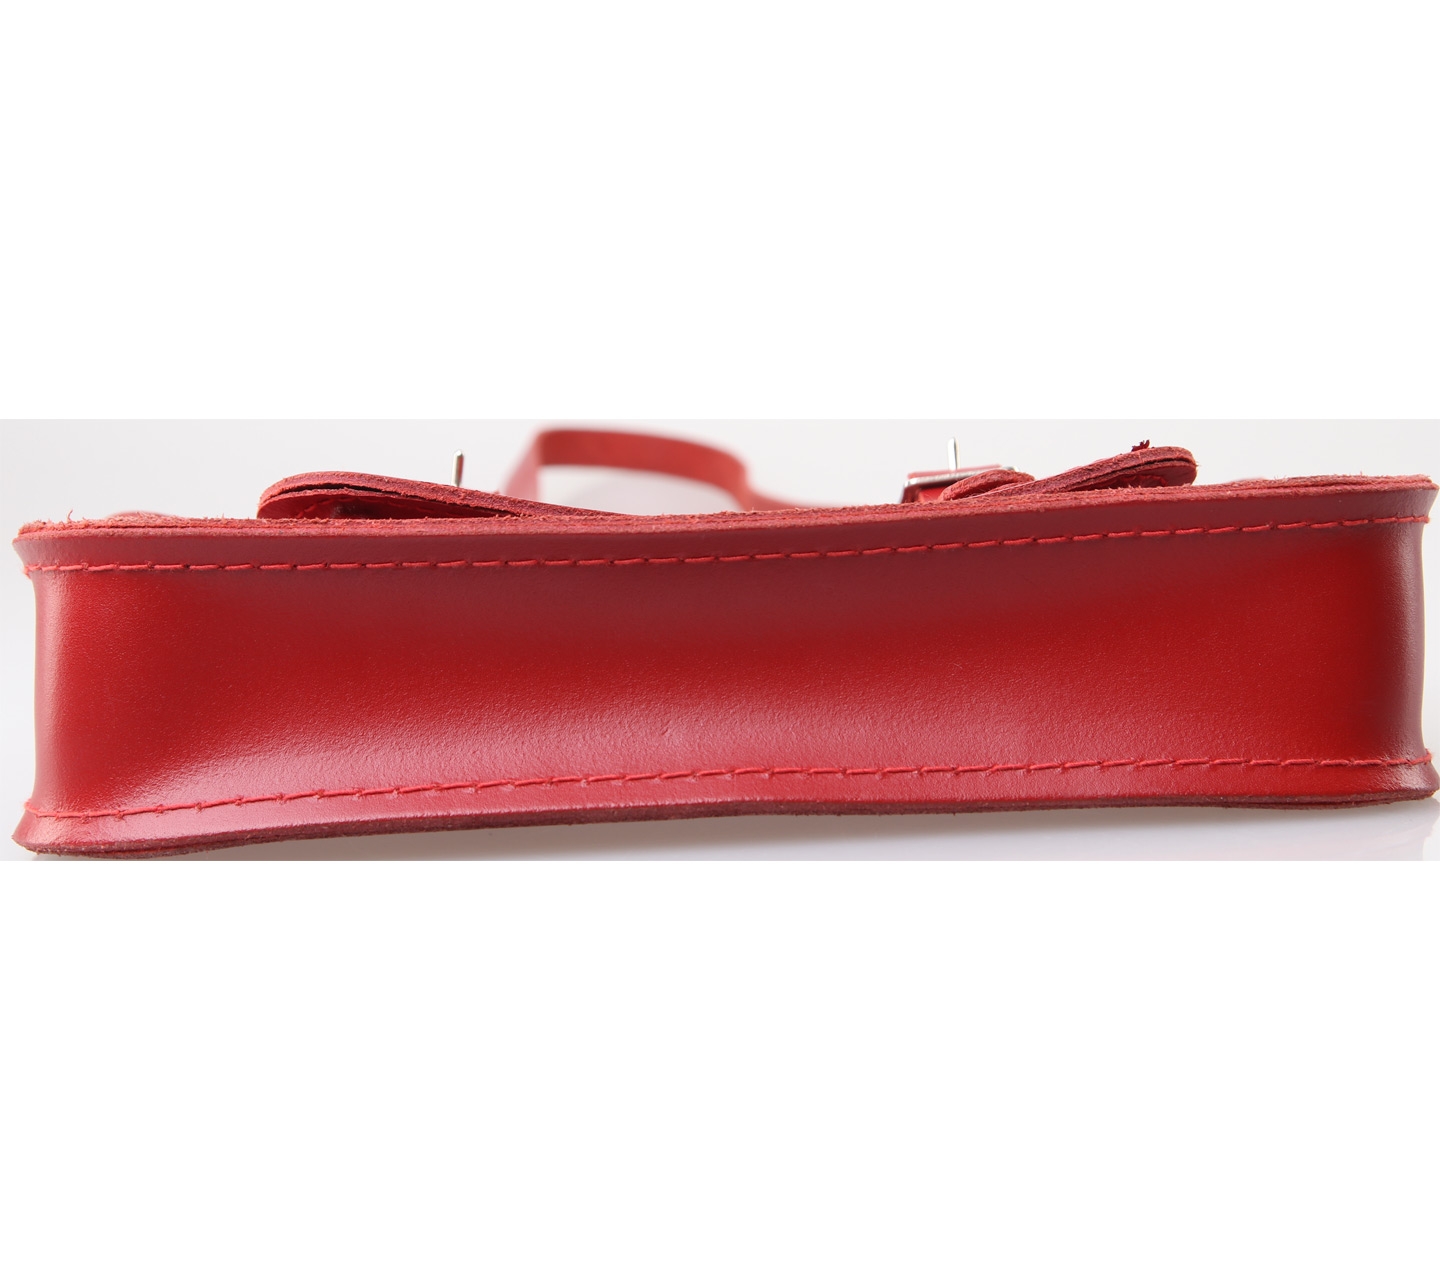 The Cambridge Satchel Company Red Sling Bag